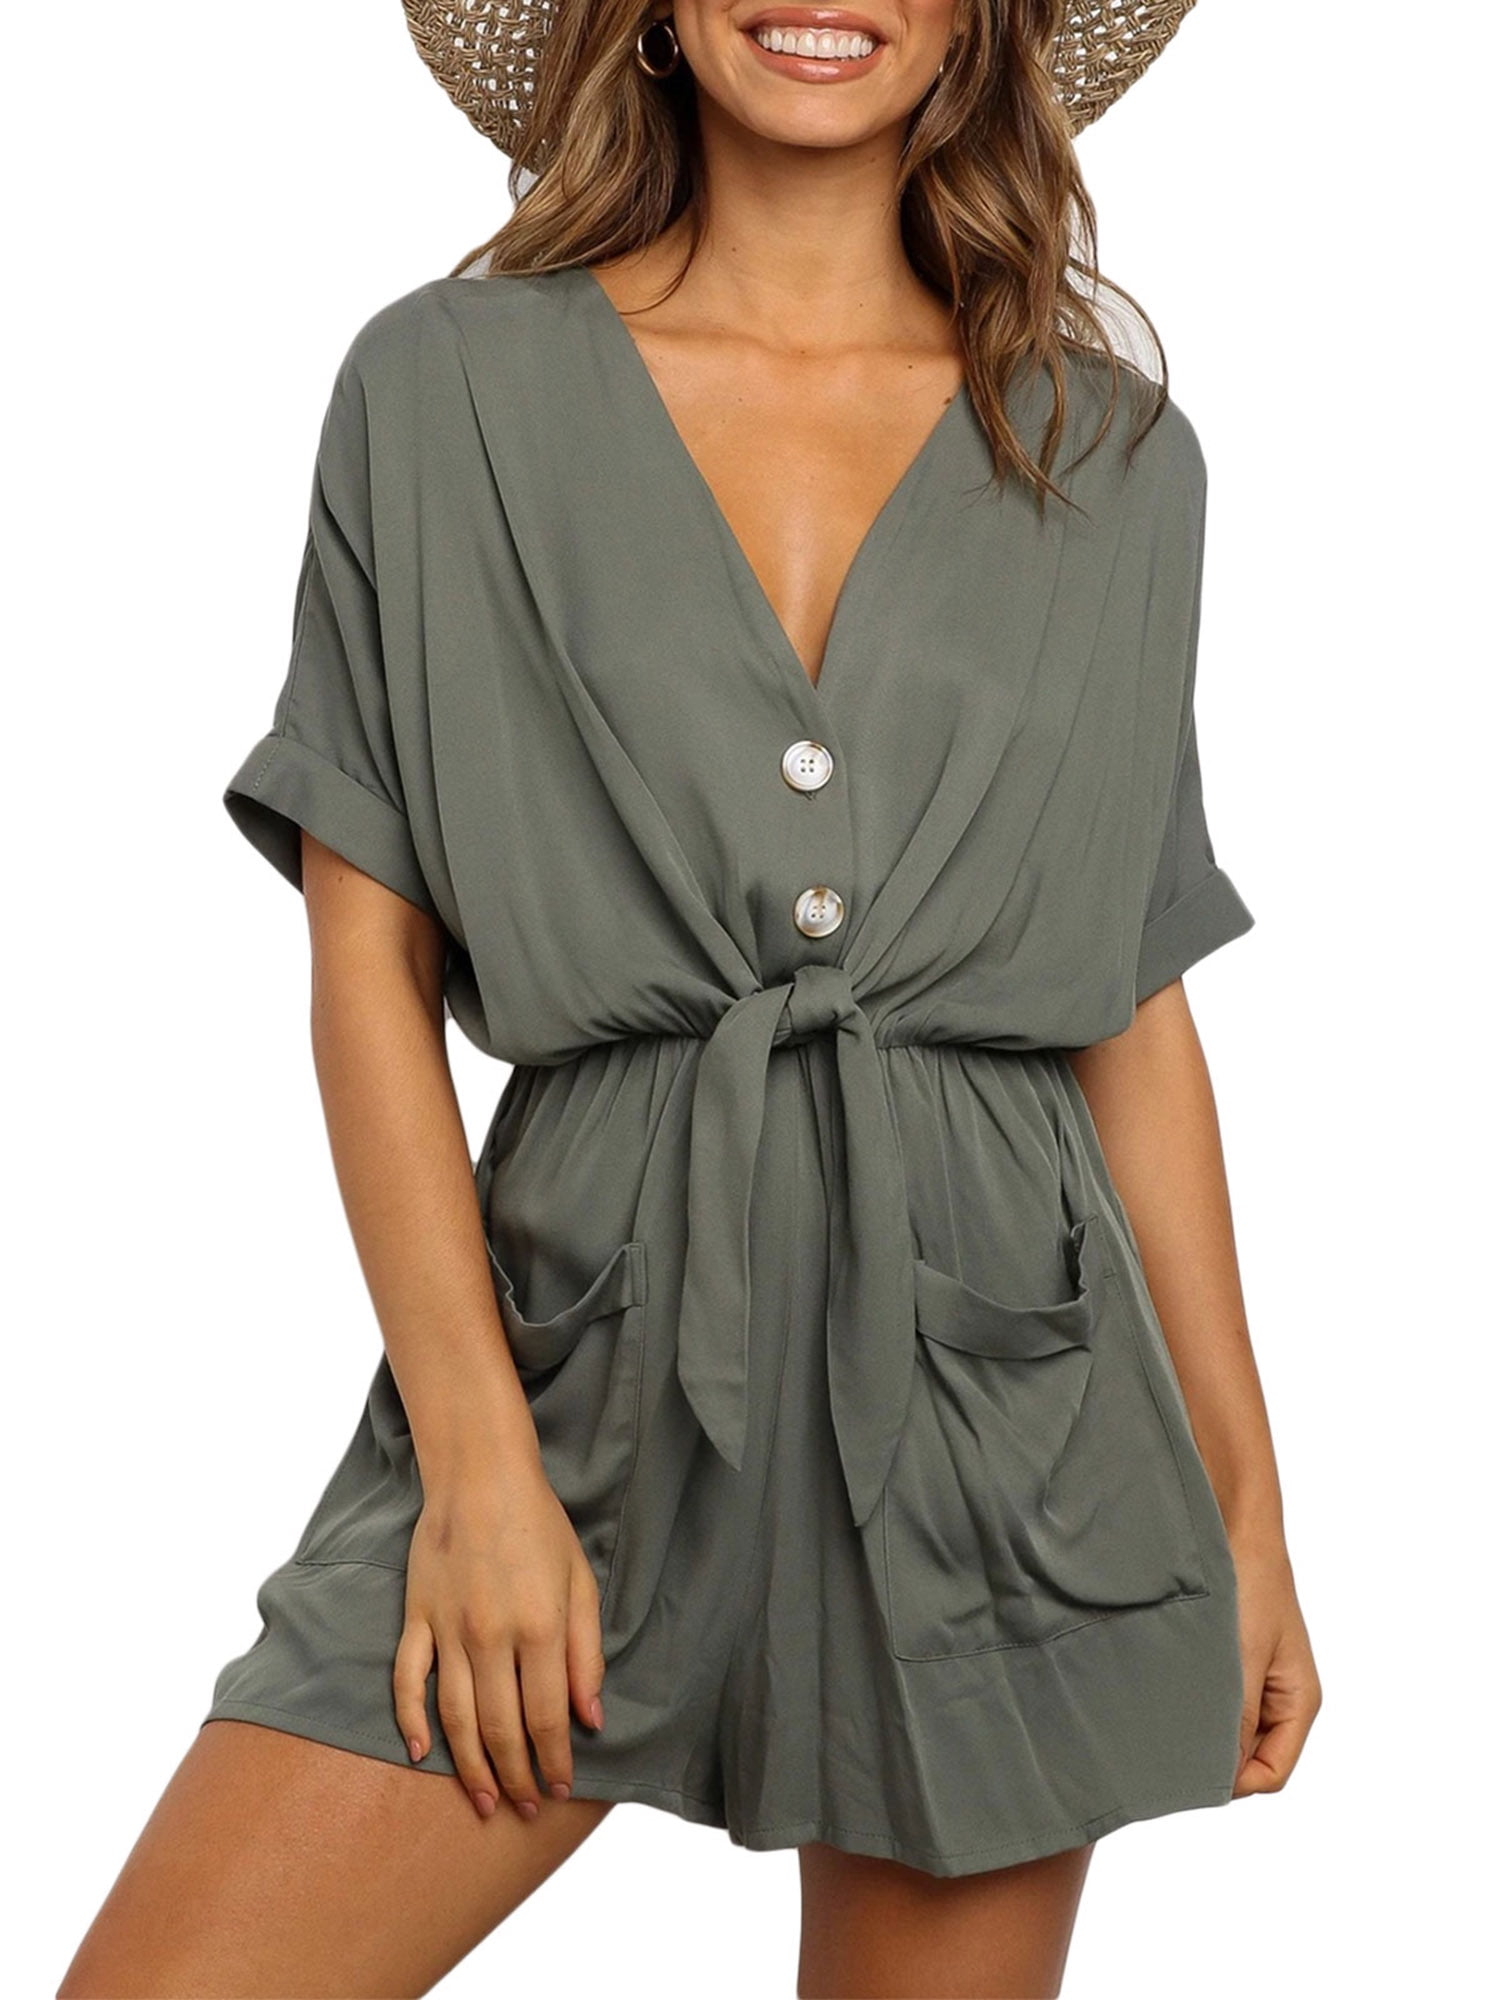 Wide Leg Pant Romper Jumpsuits Women Summer Clearance Jumpsuit Casual Short  Sleeve Pockets Wrap V-Neck Belted Wide Leg Pants Rompers Wyongtao